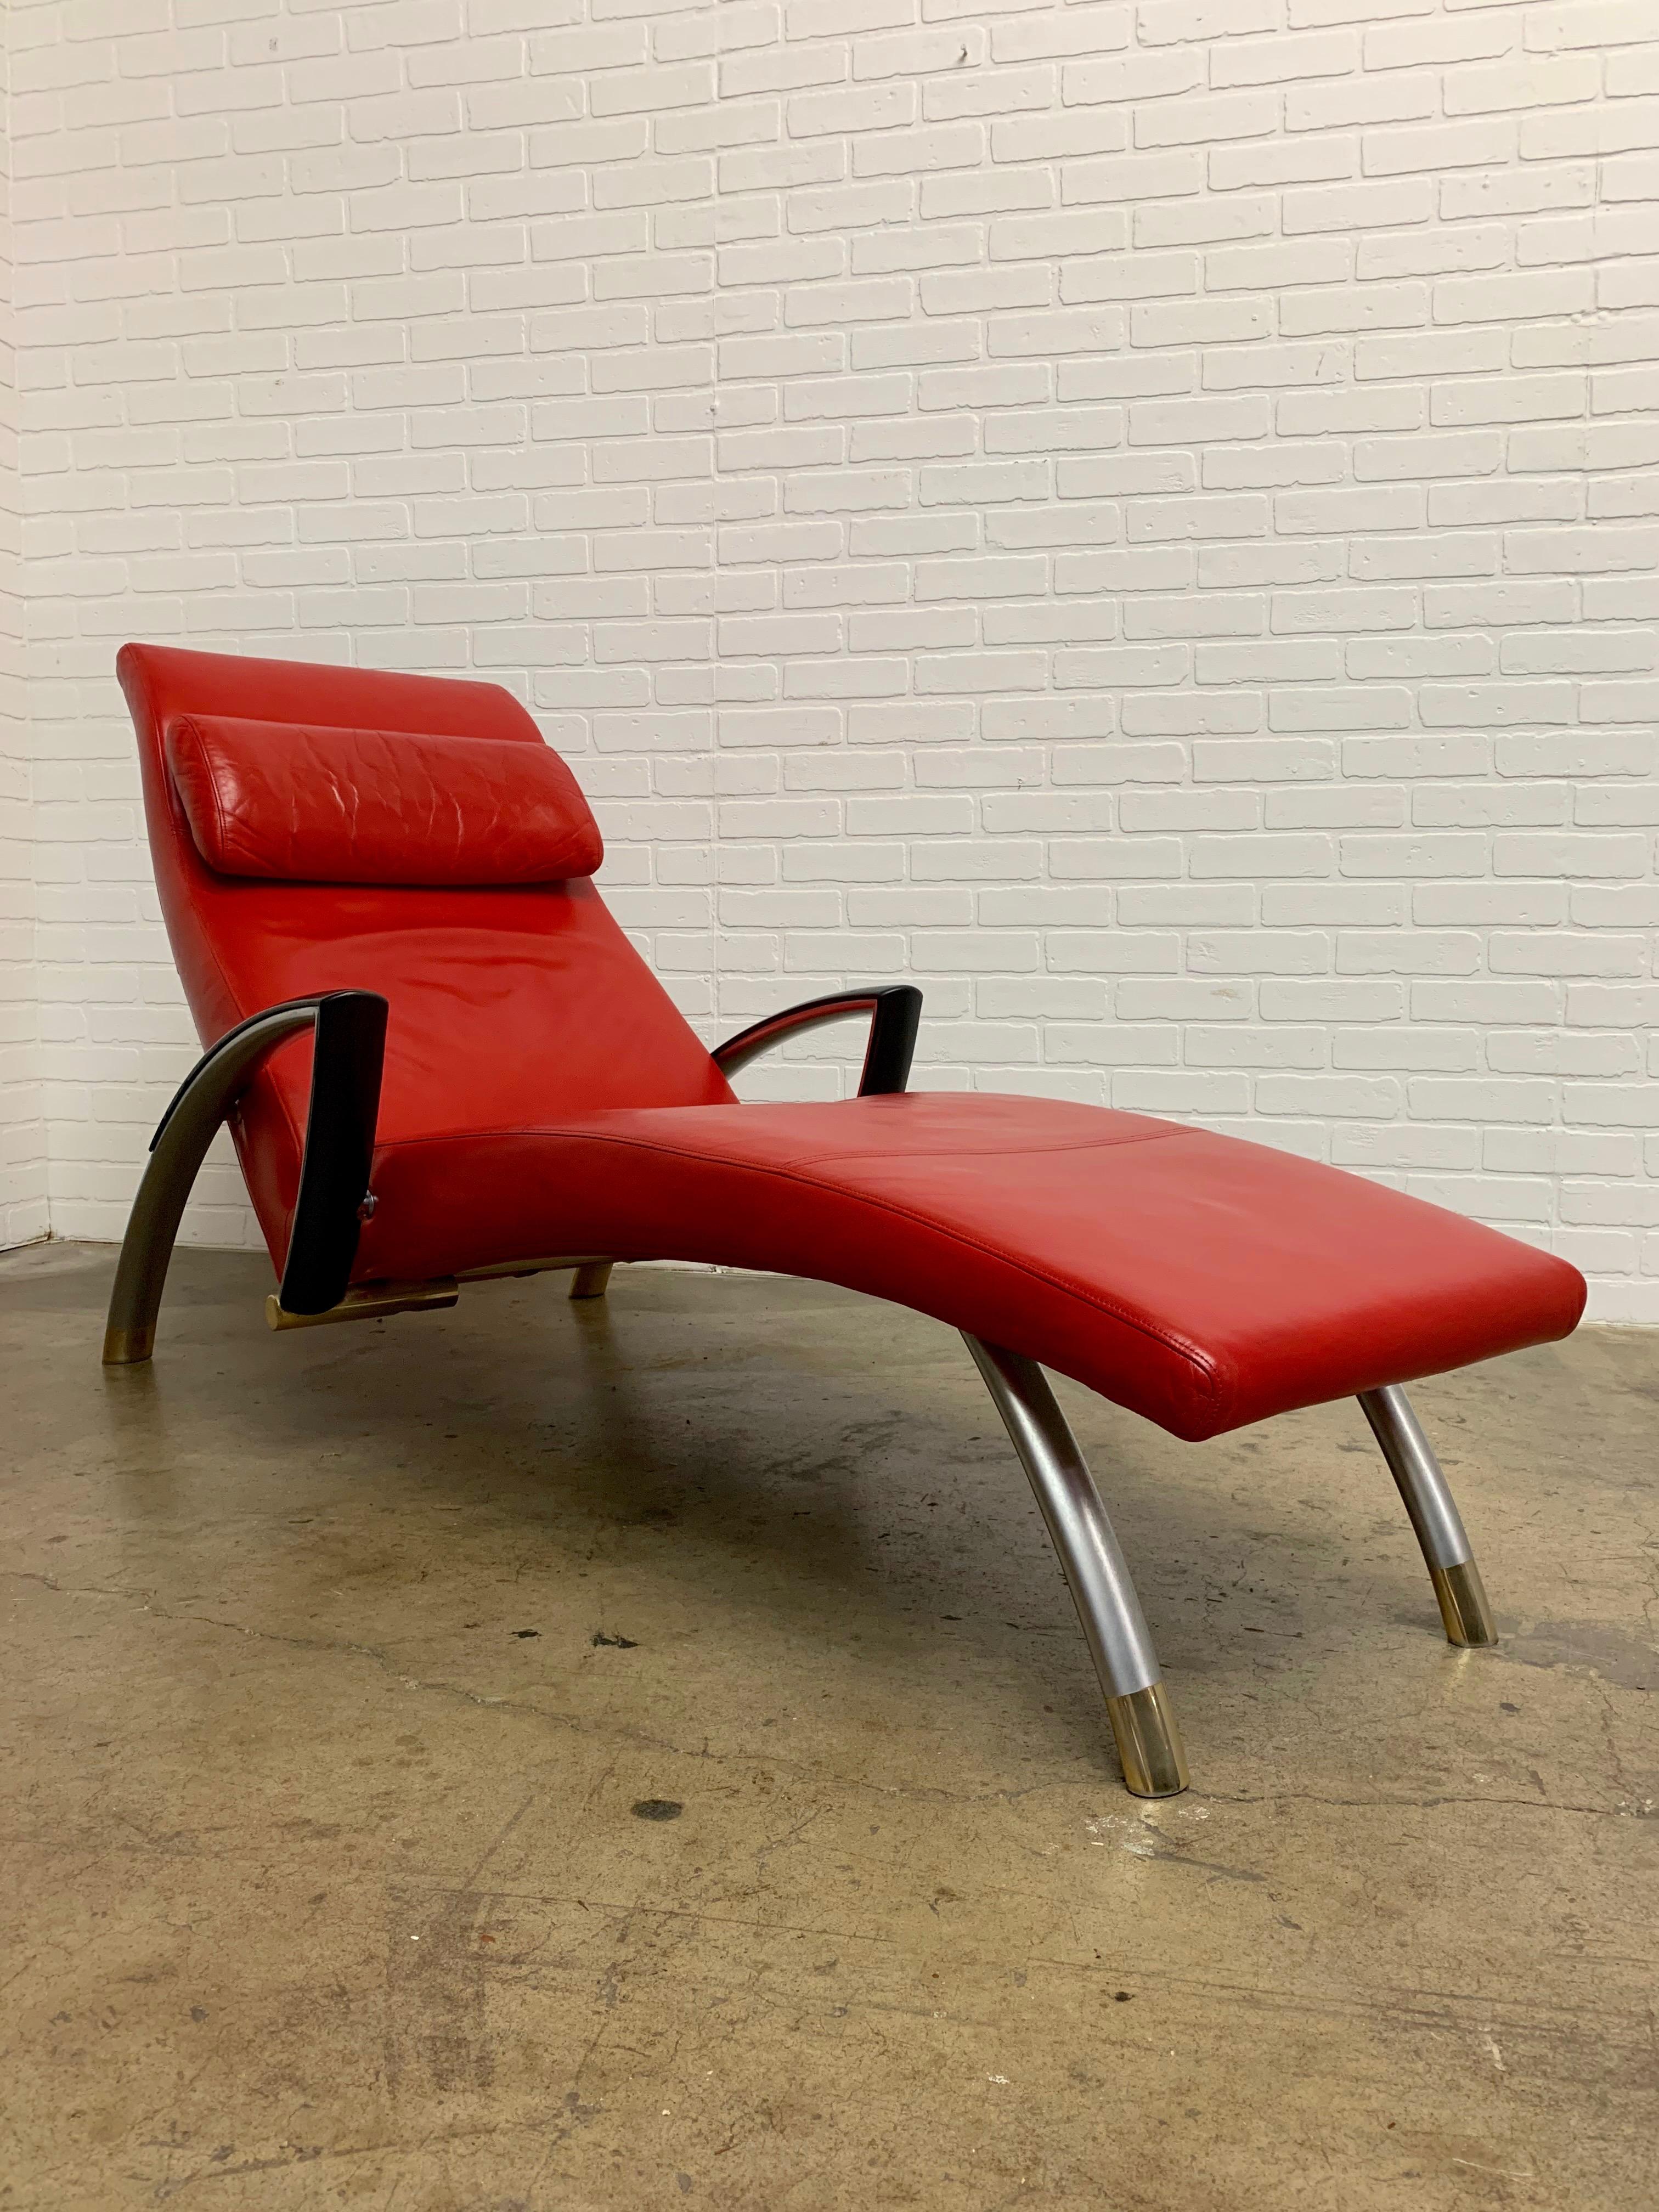 Supple lipstick red leather with brass and silver accents. The pillow is magnetized to stay in place , please see video.